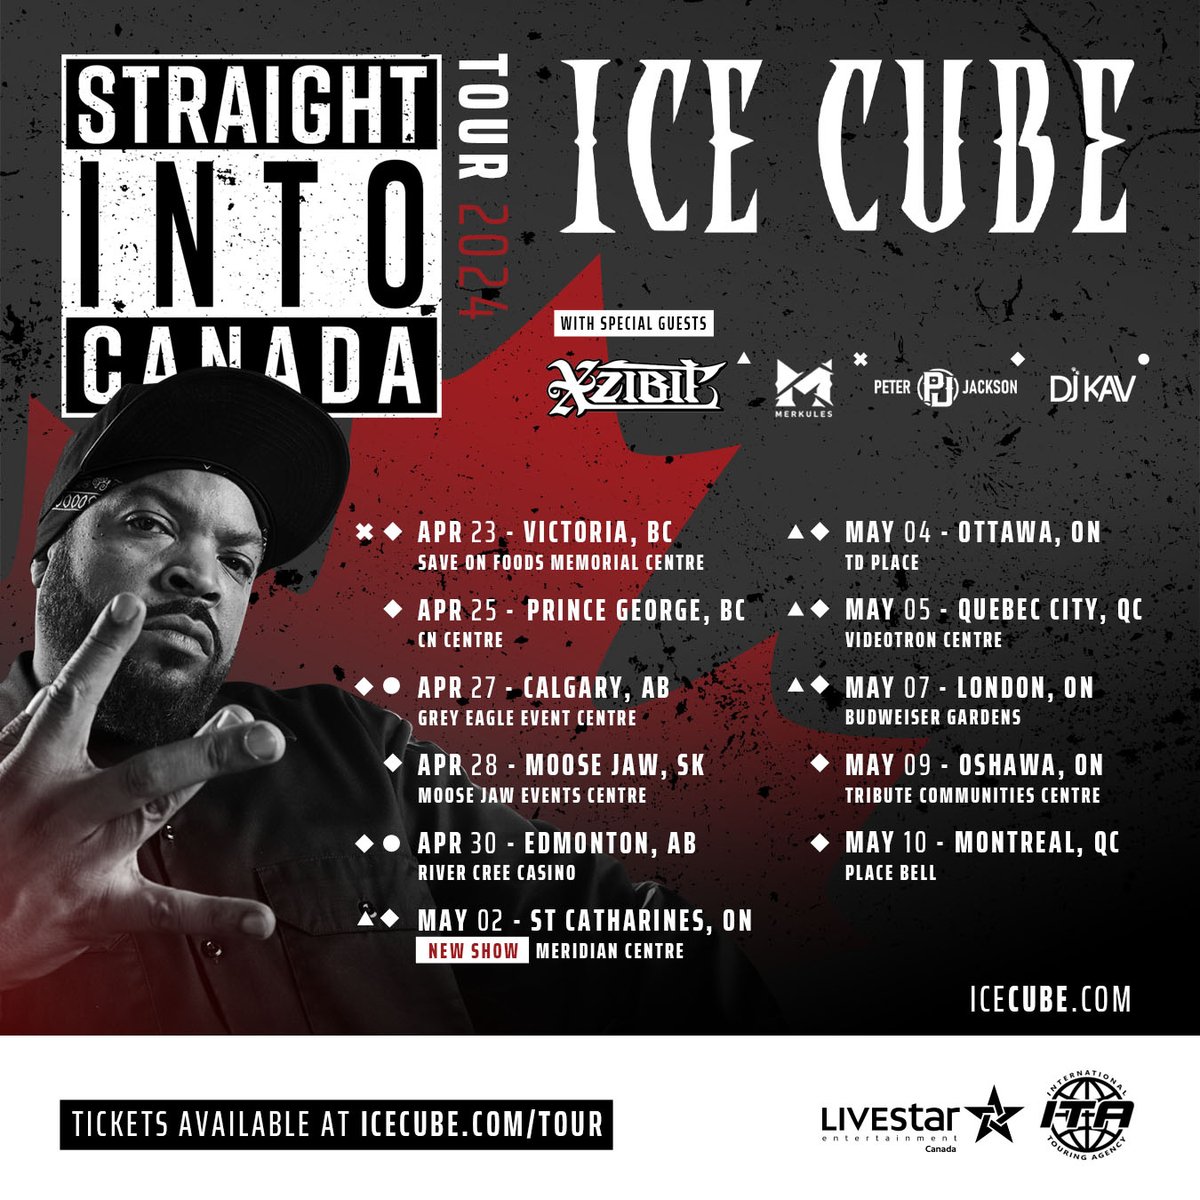 Cali Cube is bringing the heat to Canada again. First up, Victoria. Don’t miss me—icecube.com/tour.